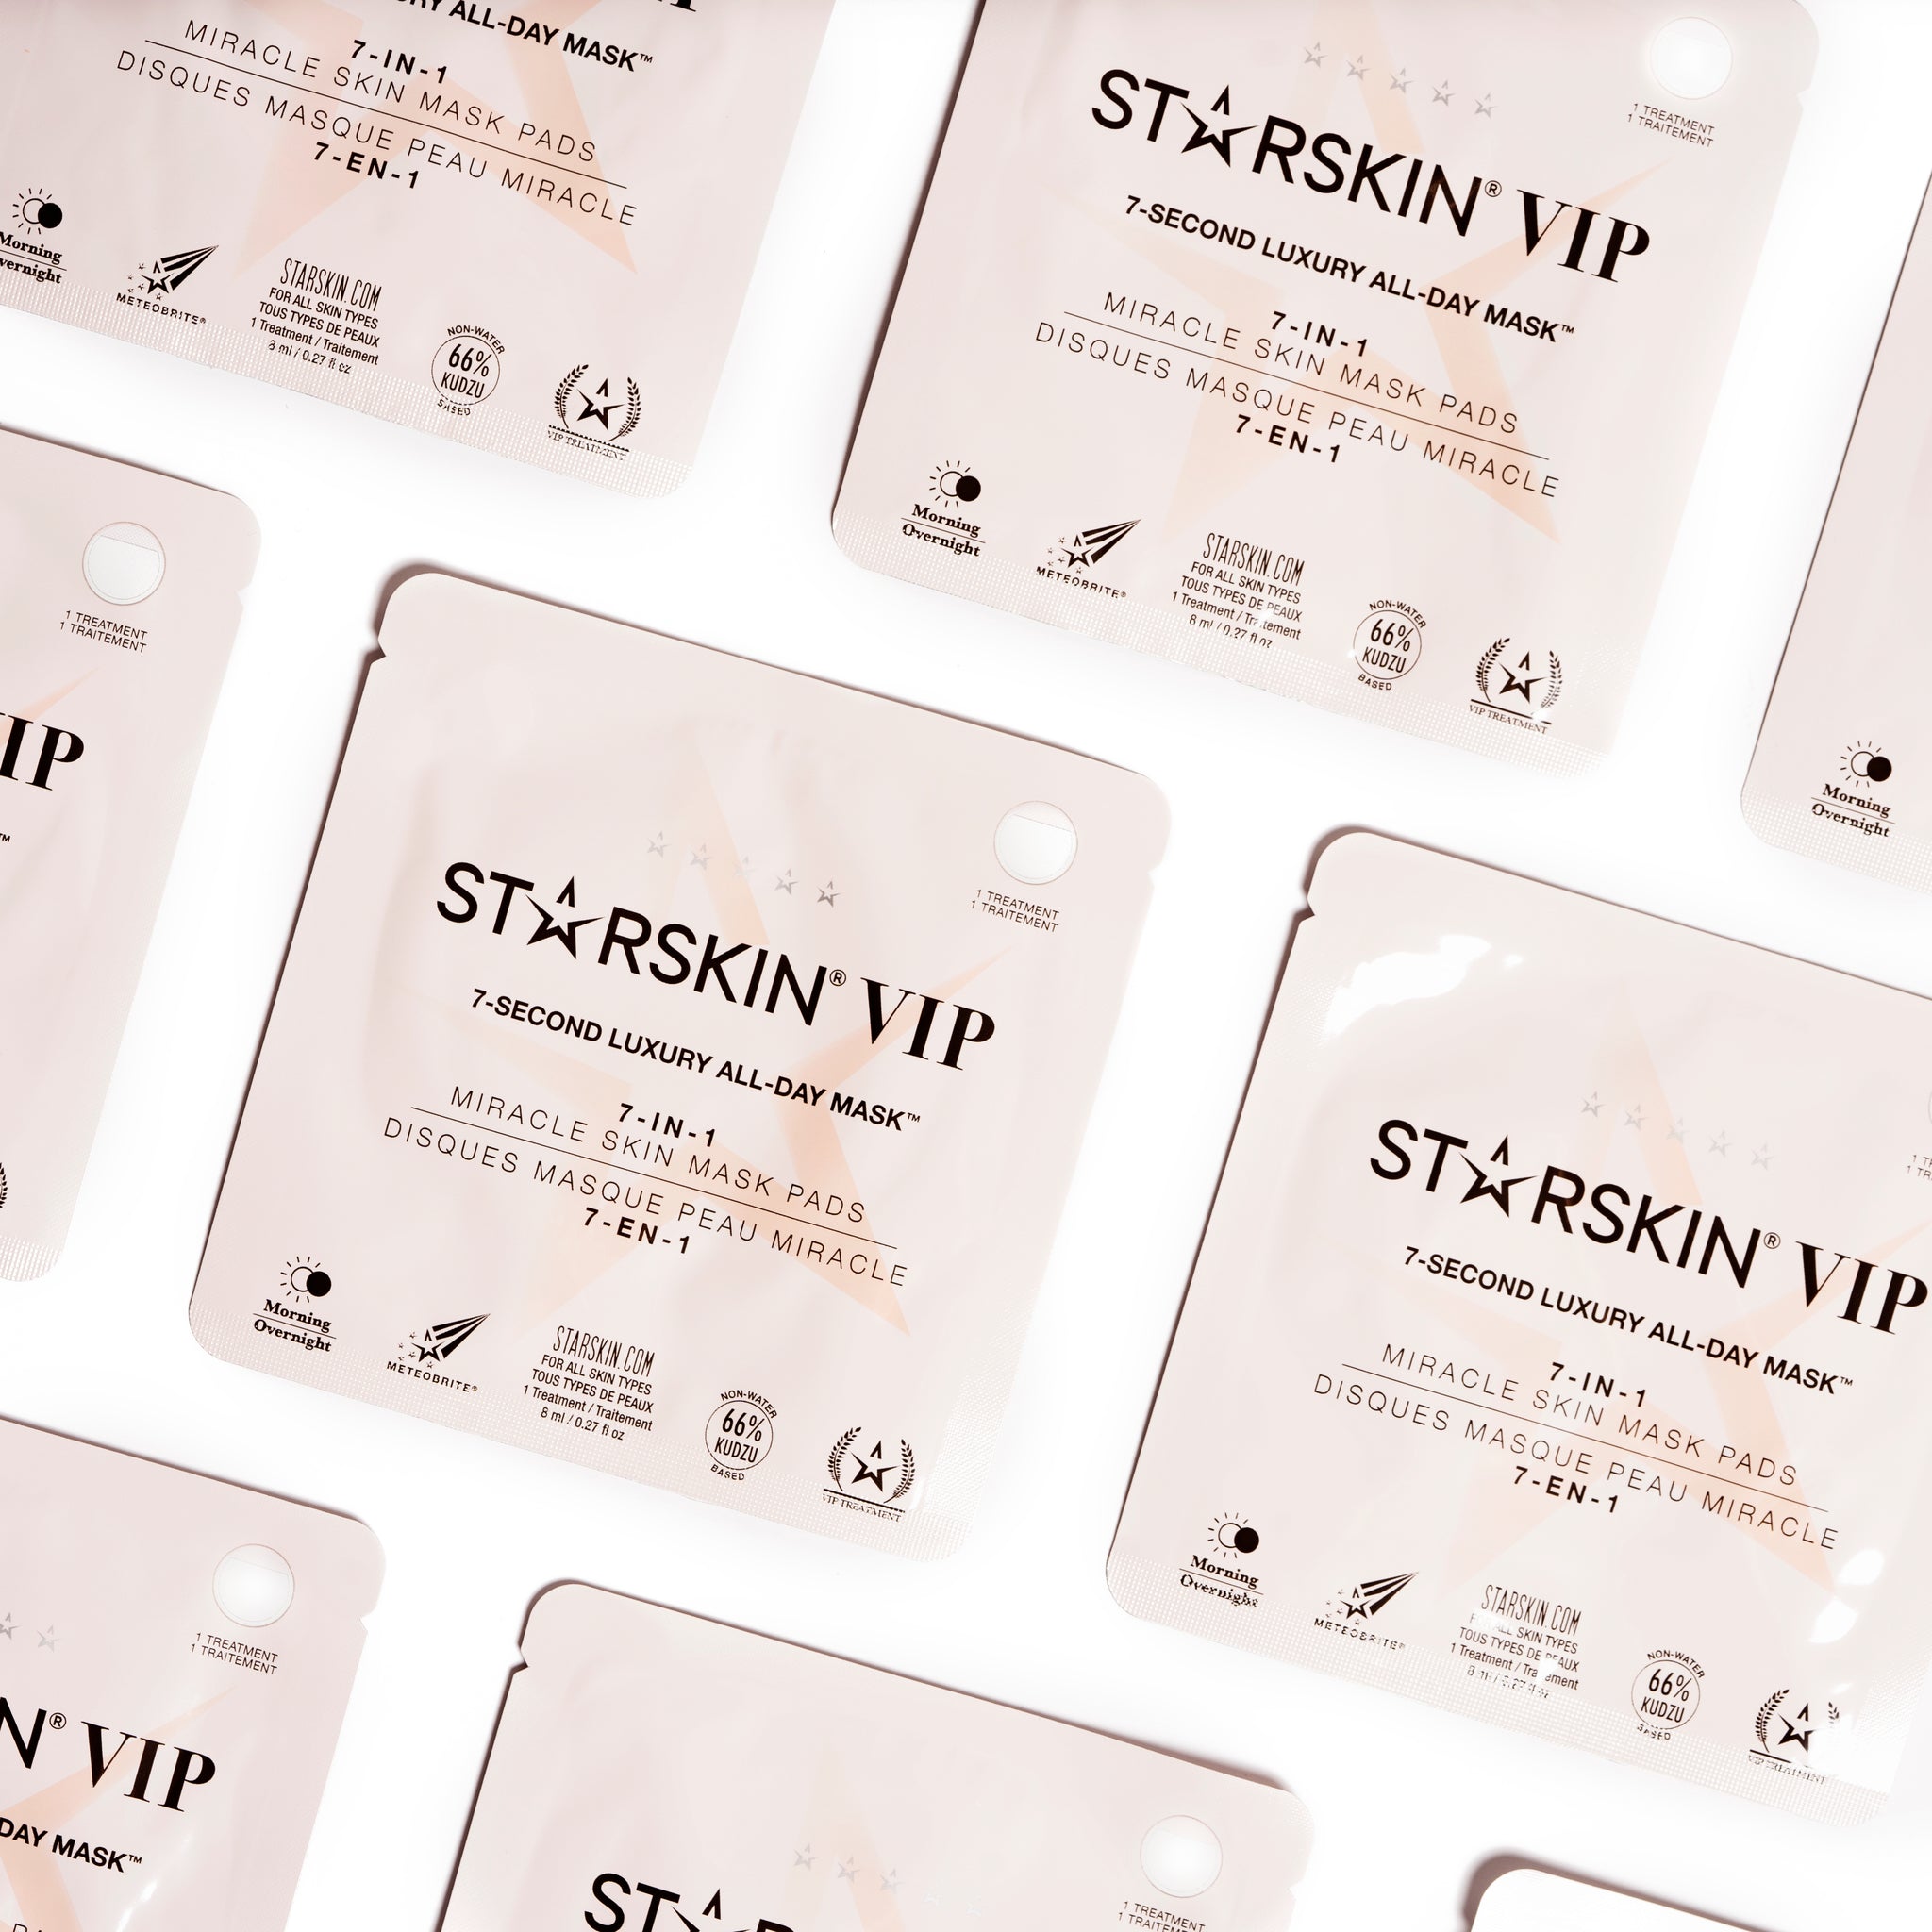 VIP 7-Second Luxury All-Day Mask™ - 5 Pack